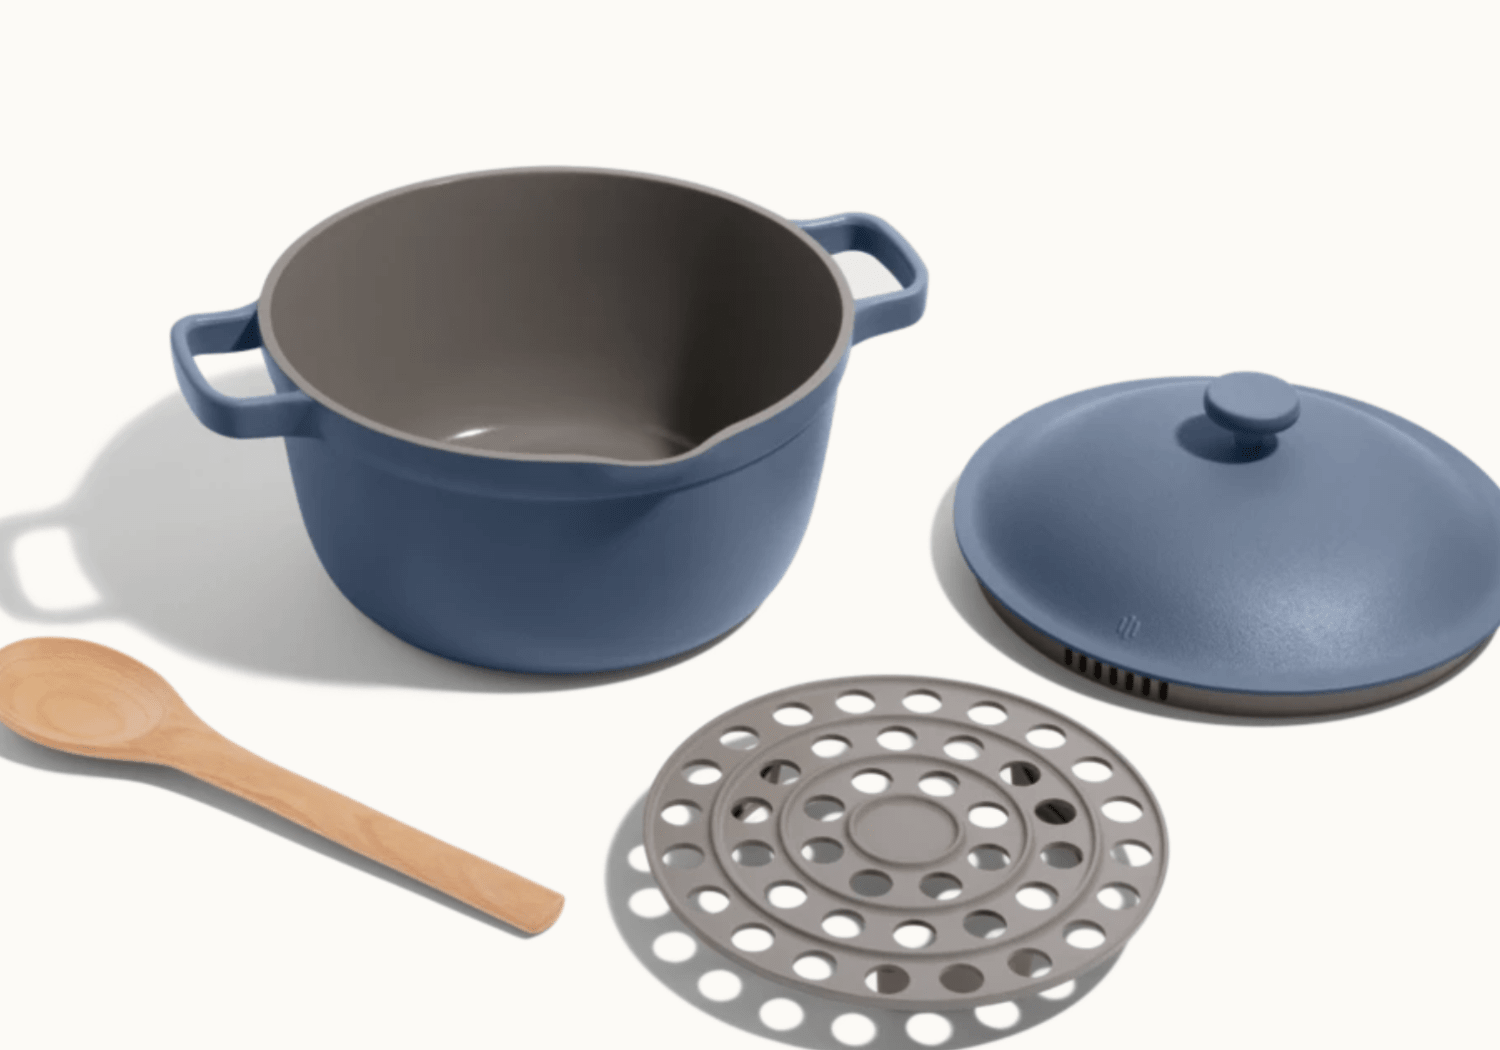 Our Place Always Pan Launches Blue Salt Colored Cookware: October 2020